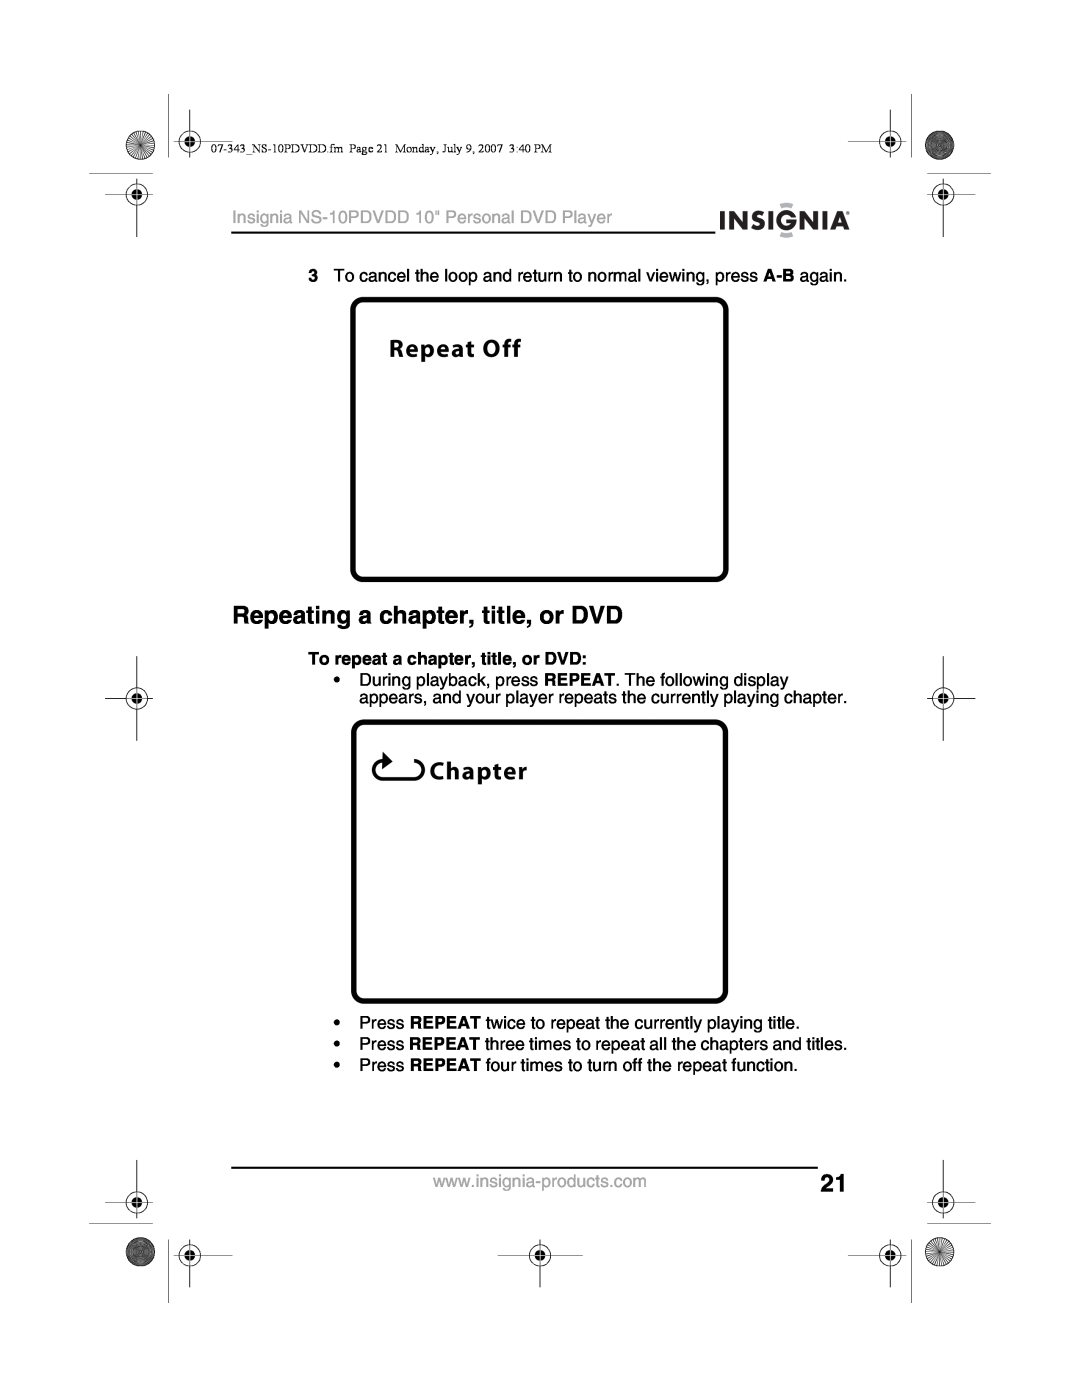 Insignia NS-10PDVDD manual Repeat Off, Repeating a chapter, title, or DVD, Chapter, To repeat a chapter, title, or DVD 